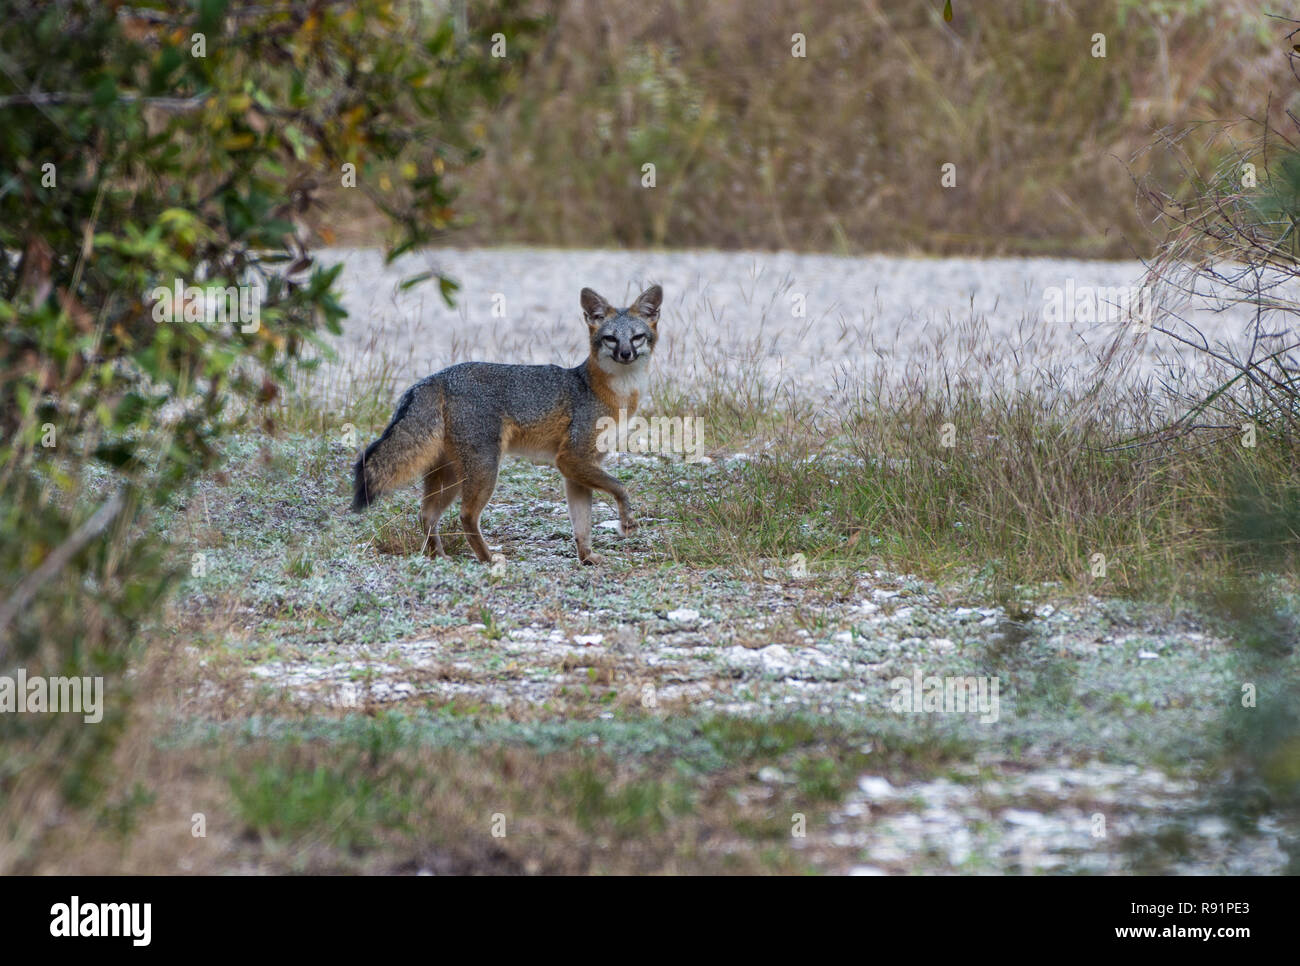 A Gray Fox (Urocyon cinereoargenteus) came out of woods, posted for photo. Goose Island State Park, Rockport, Texas, USA. Stock Photo